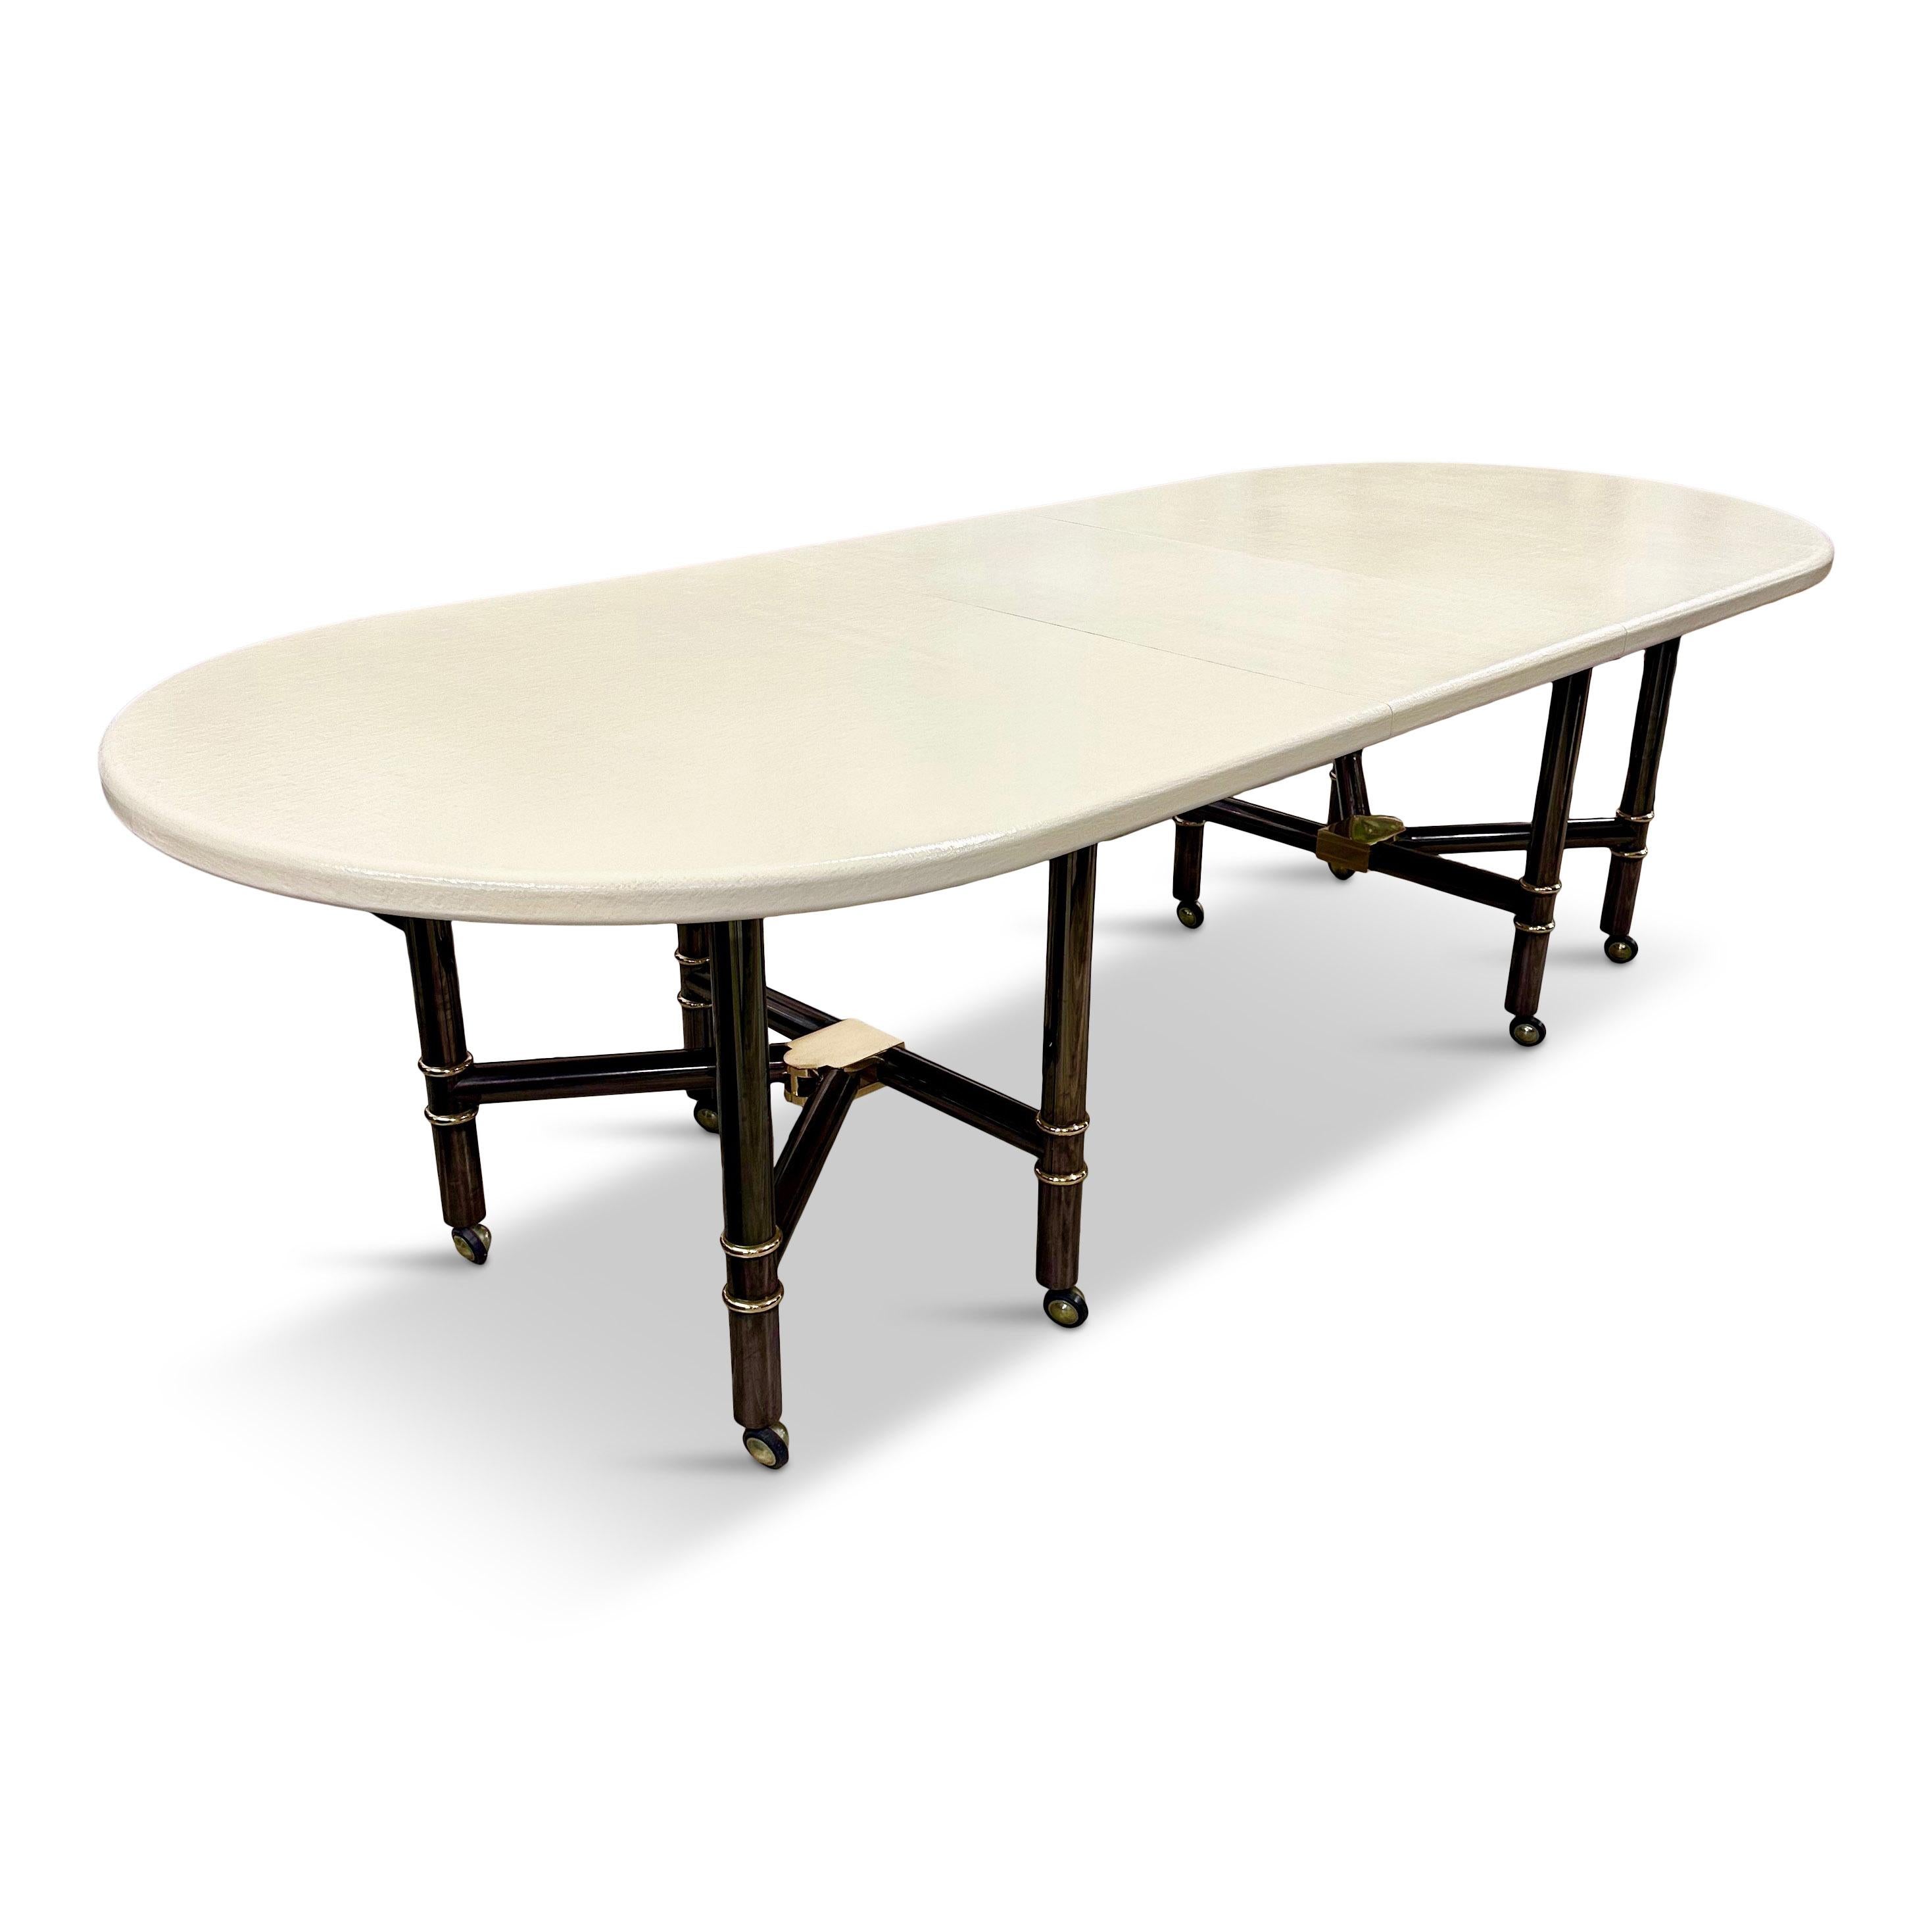 This is perhaps Maison Jansen's most iconic design ever made. This incredibly rare table, of which only a dozen or less are even in the world. This is a foldable dining table, that has a canvas texture and gunmetal steel and brass folding legs with